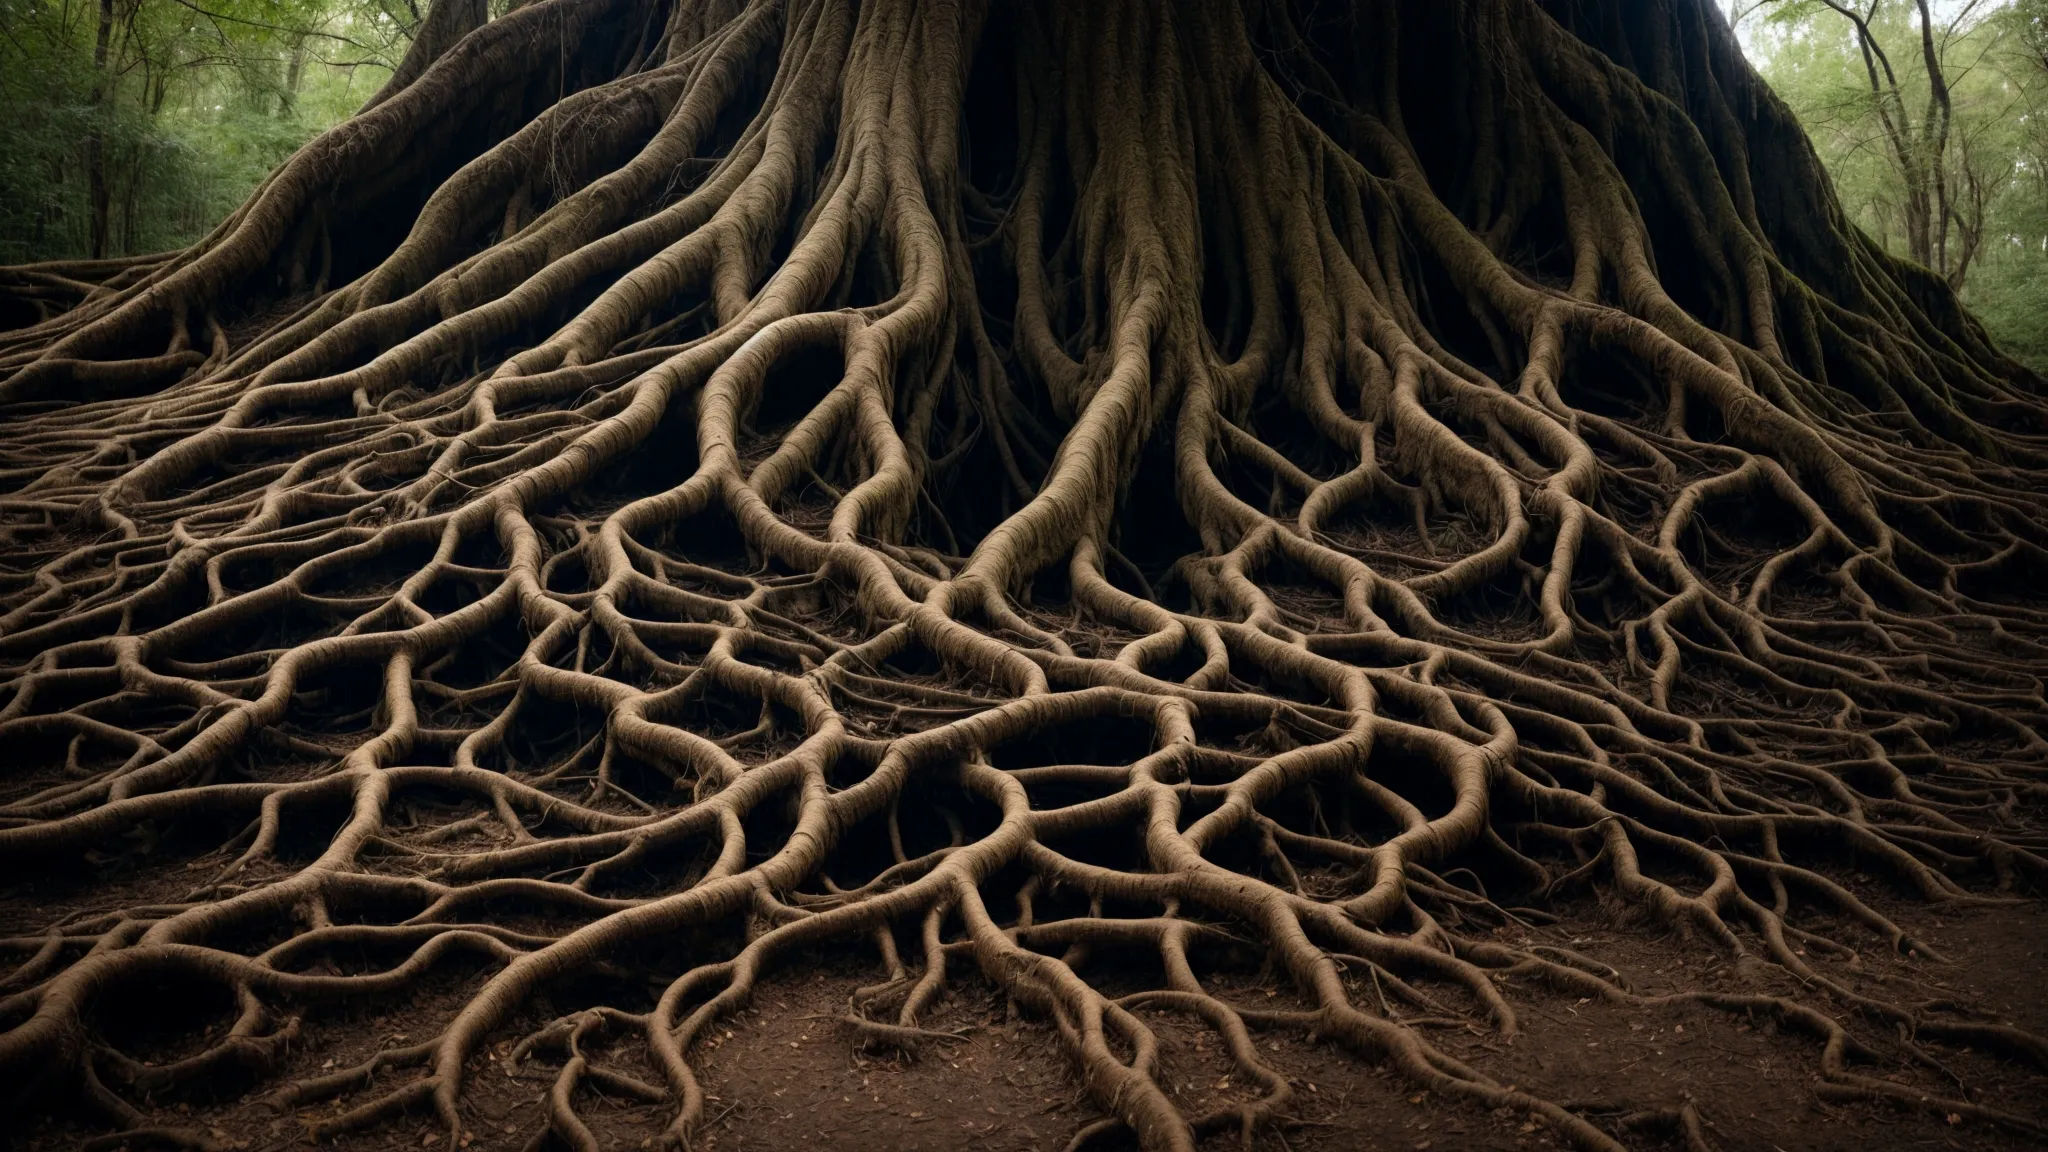 a tree's intricate root system visibly intertwining and spreading out into the fertile soil.